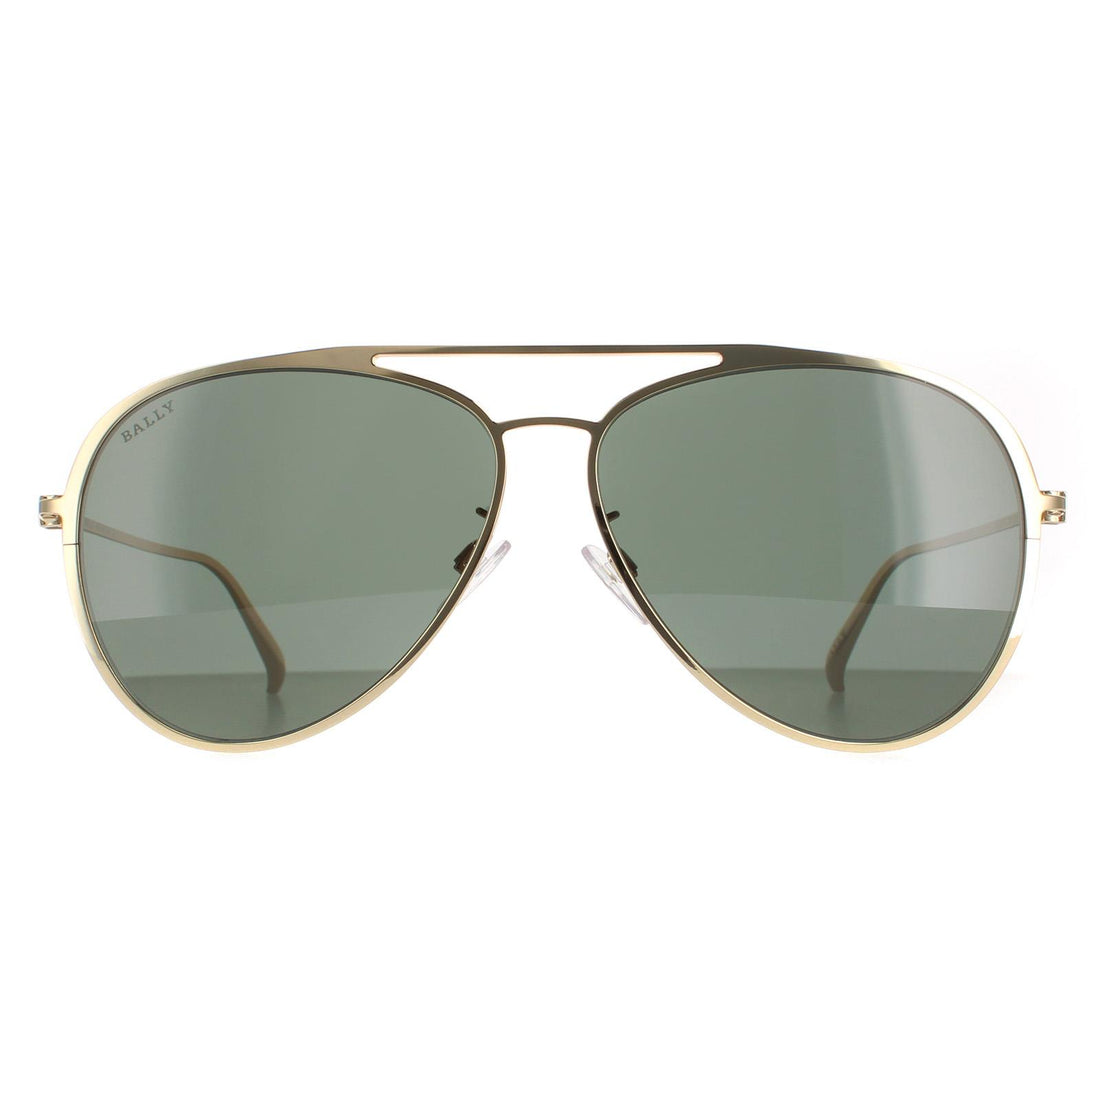 Bally BY0024-D Sunglasses Gold / Green